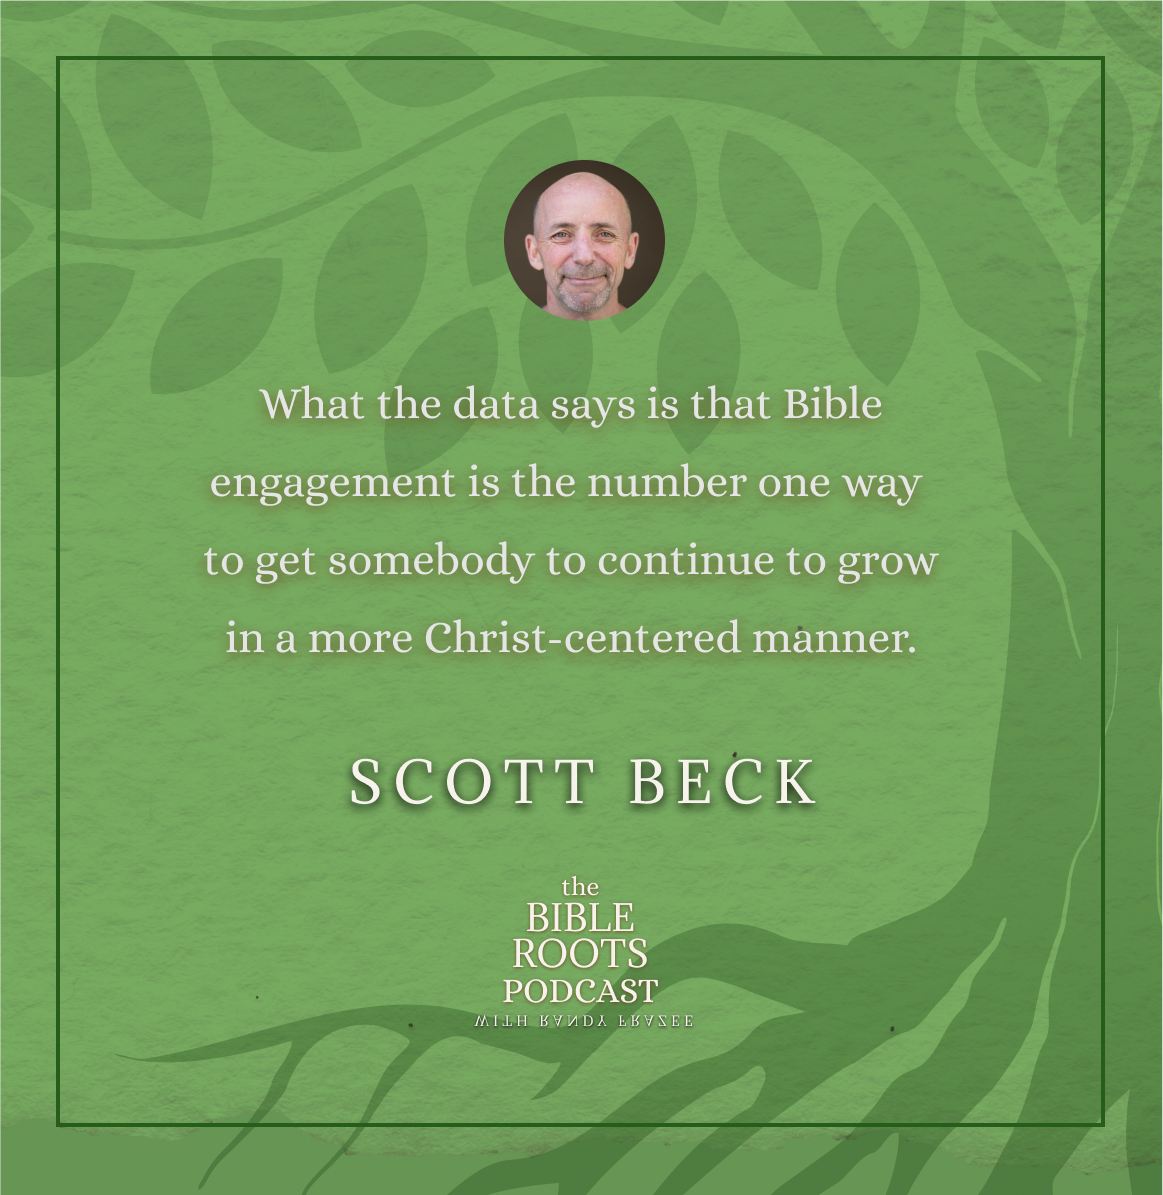 What the data says is that Bible engagement is the number one way to get somebody to continue to grow in a more Christ-centered manner. Scott Beck